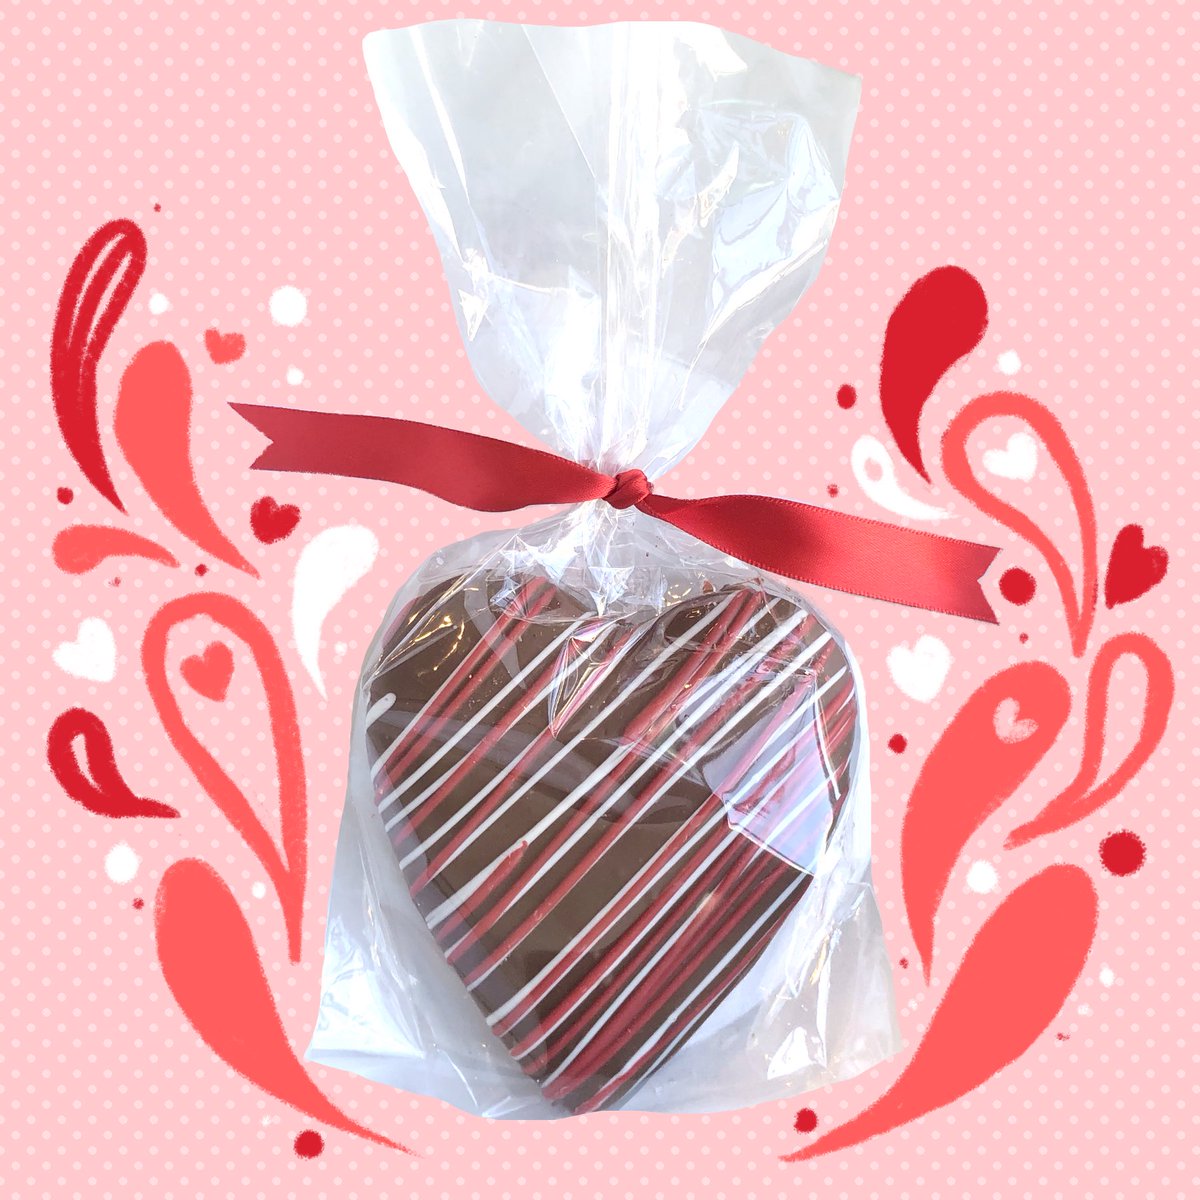 Scrumdiddlyumptious dark or milk chocolate-covered chewy, buttery caramel hearts have arrived! #valentinesday #artistinresidence #caramel #chocolatehearts #carefullycuratedconfectionssince2007